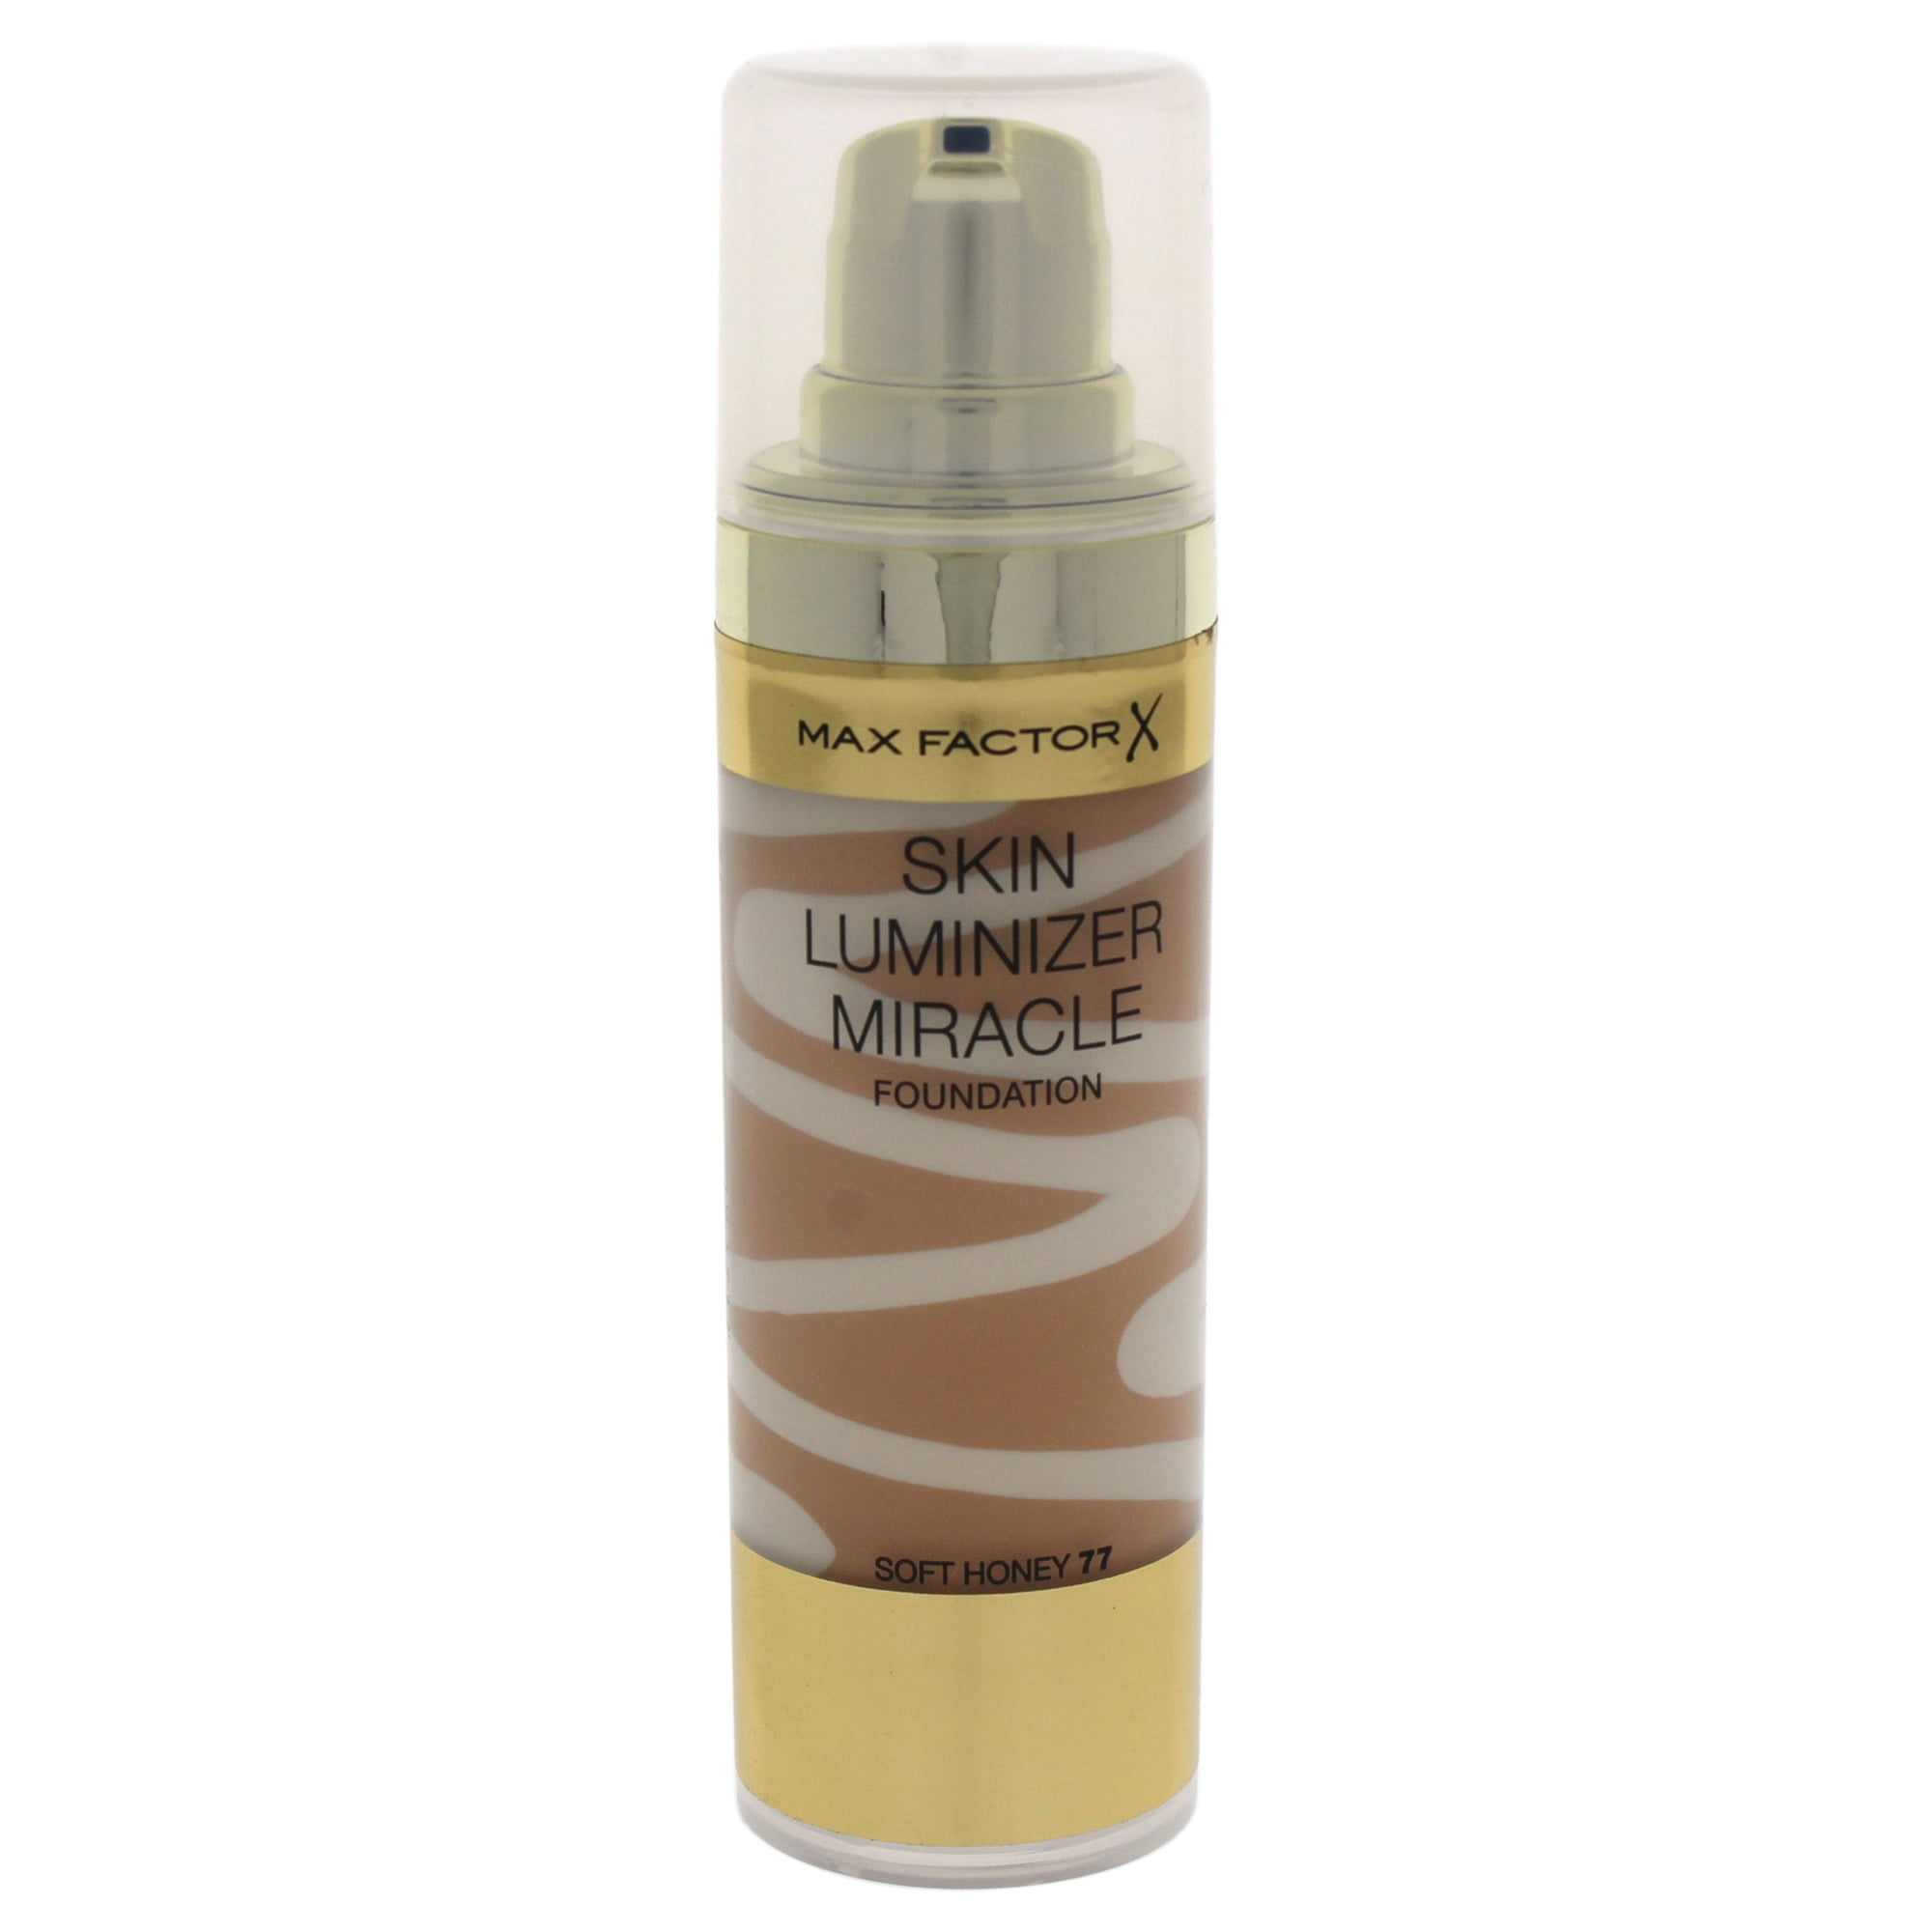 Skin Soft Factor Honey oz 77 - for Miracle Luminizer Max Foundation # Foundation Women - by 1